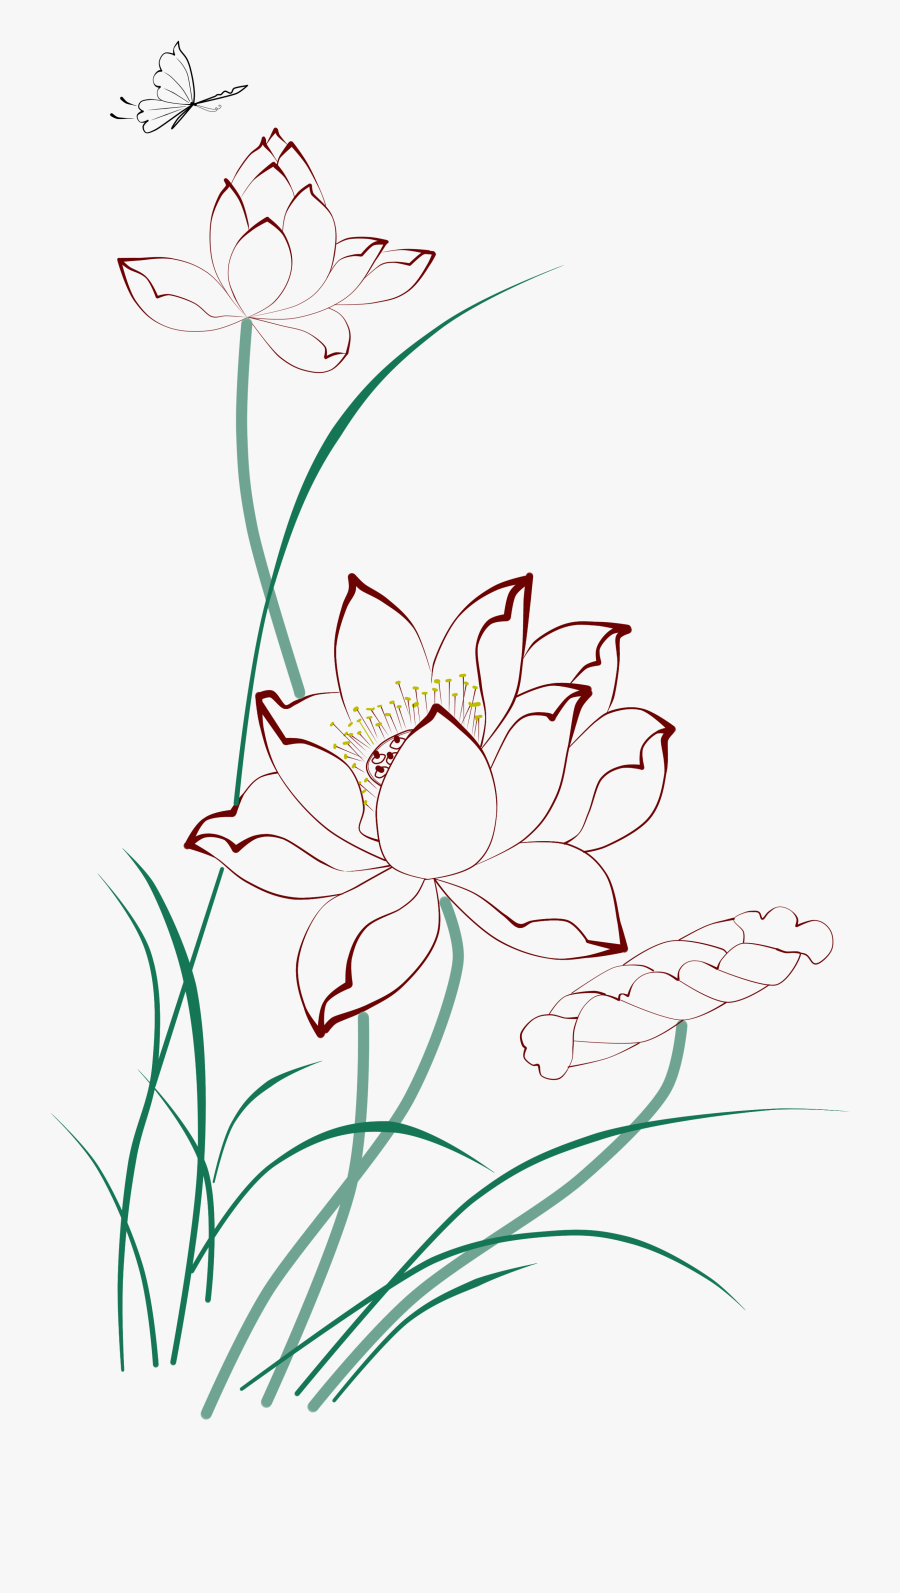 Clipart Stock Egypt Drawing Flora - 荷花 素材, Transparent Clipart